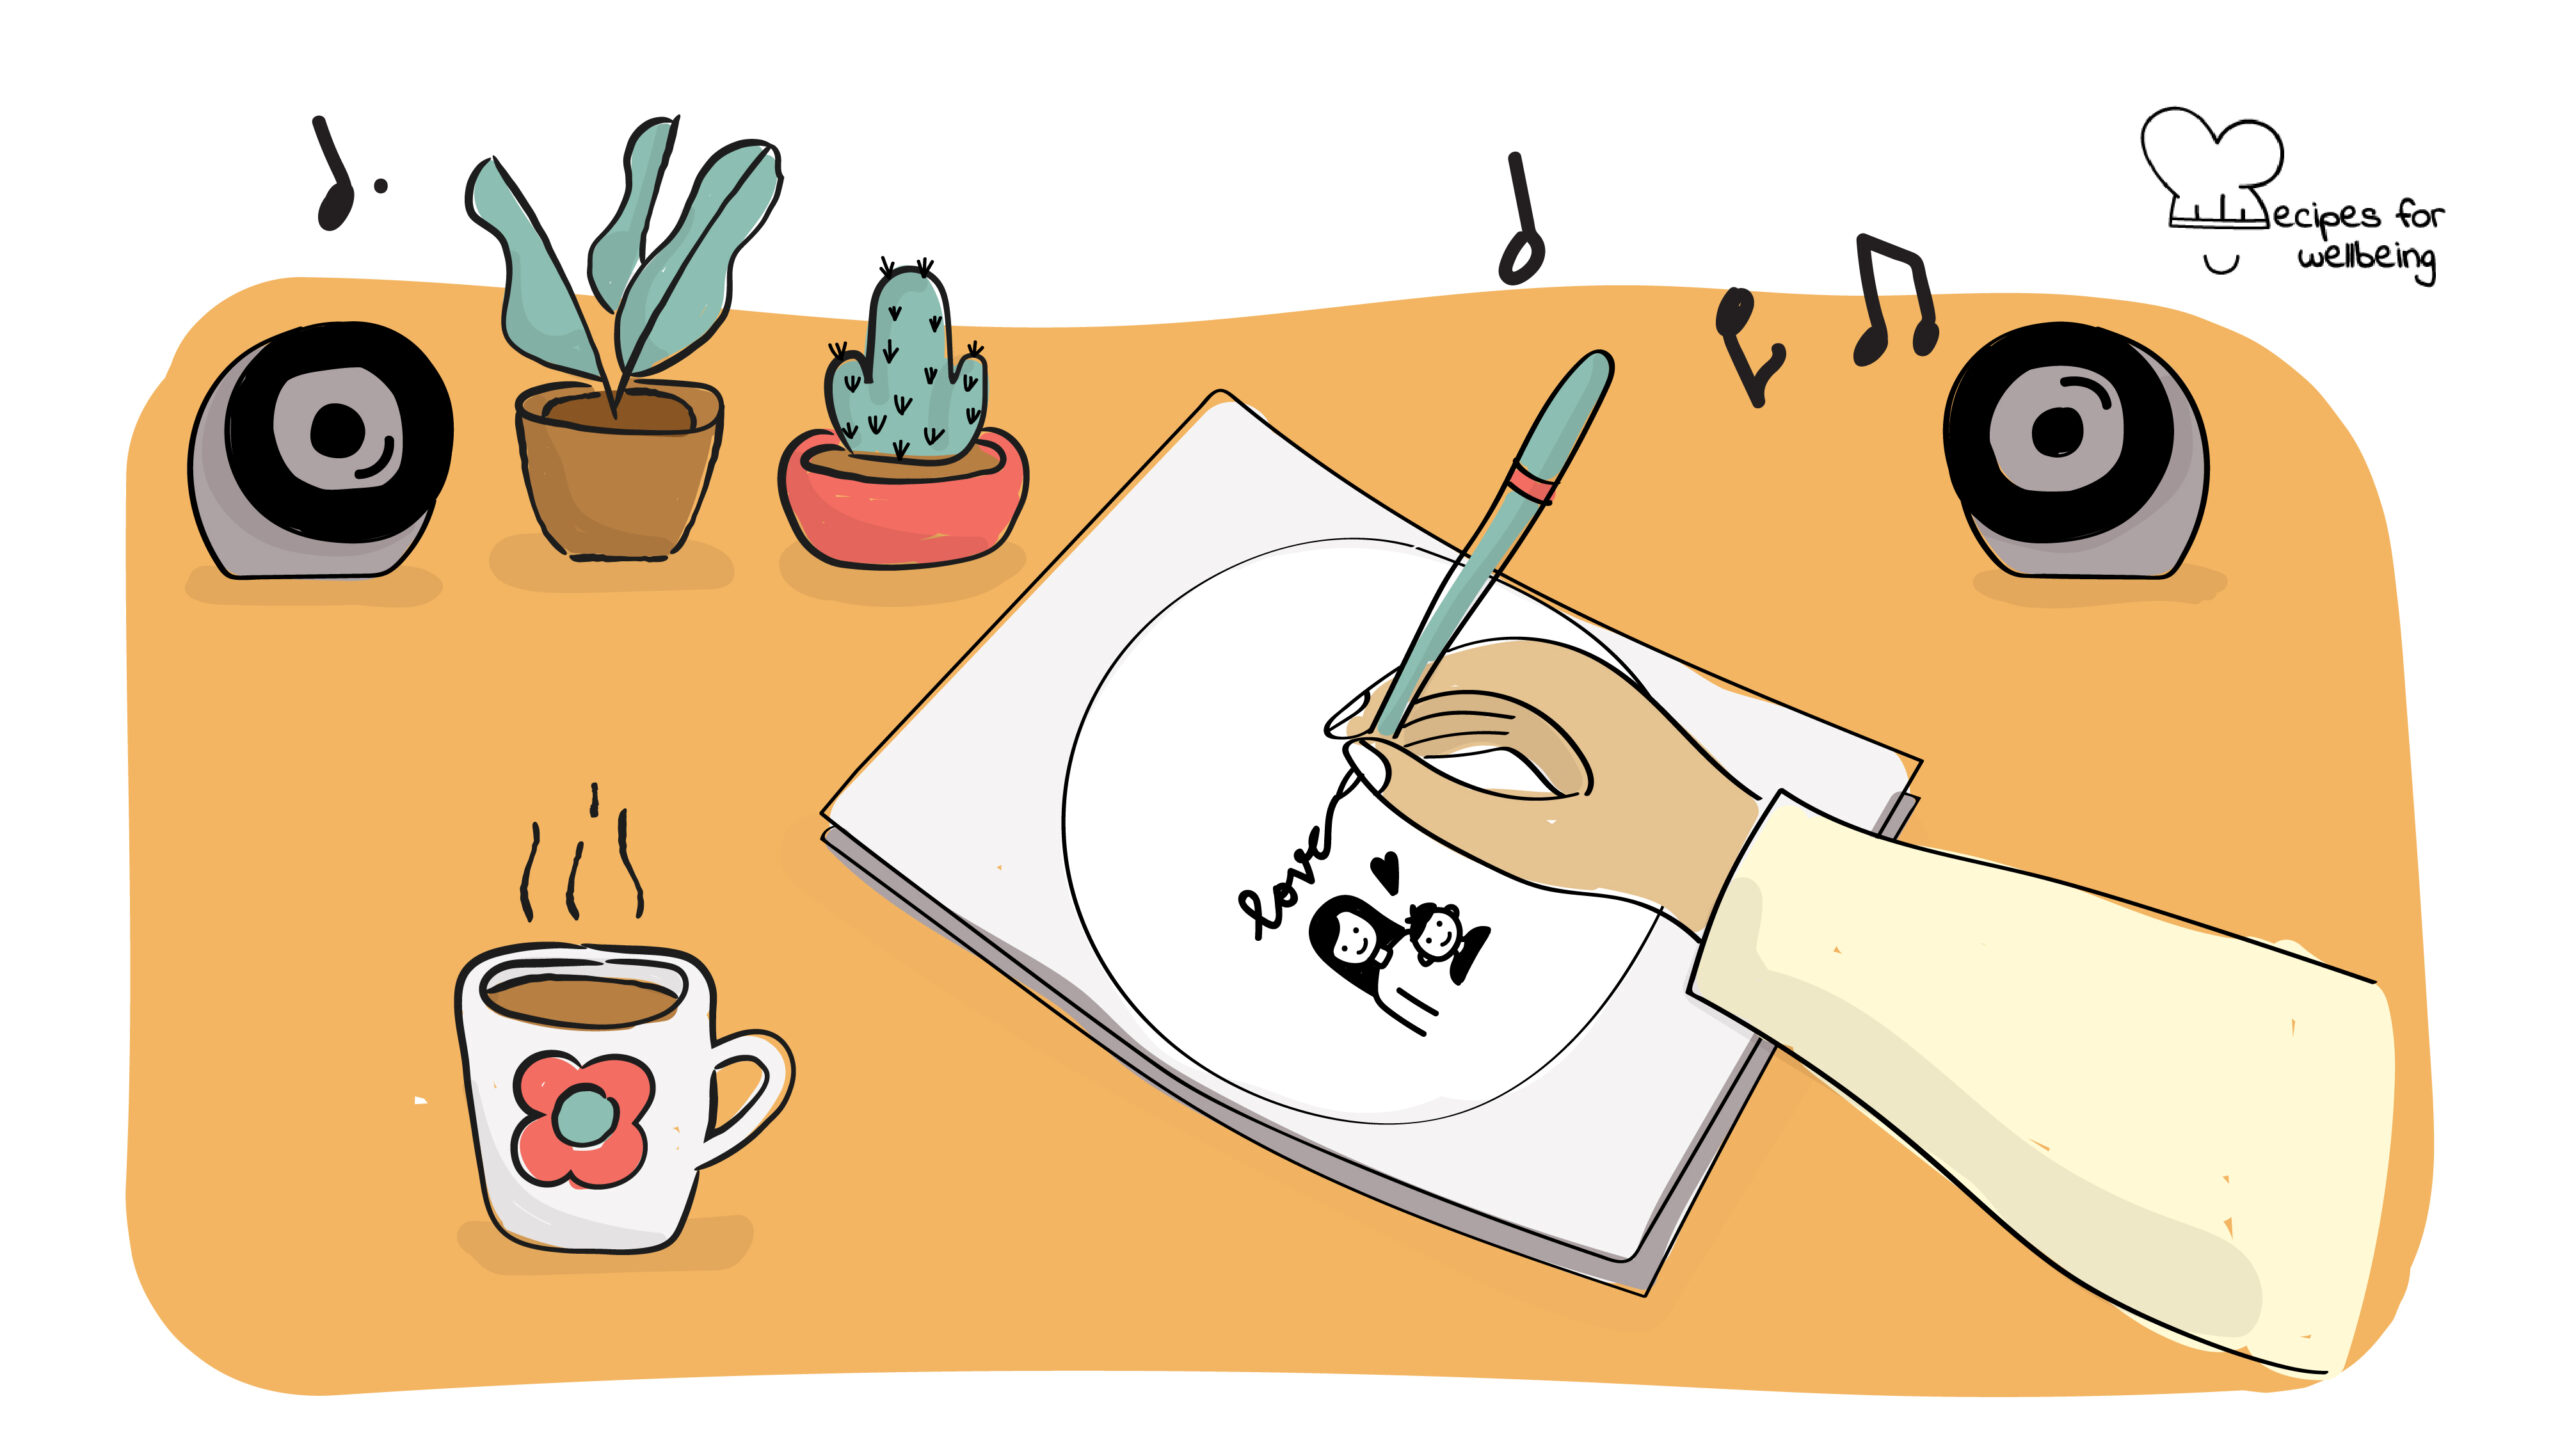 Illustration of a person's hand drawing on a sheet of paper with music playing from a speaker, a mug with a hot beverage and a table plant nearby. © Recipes for Wellbeing